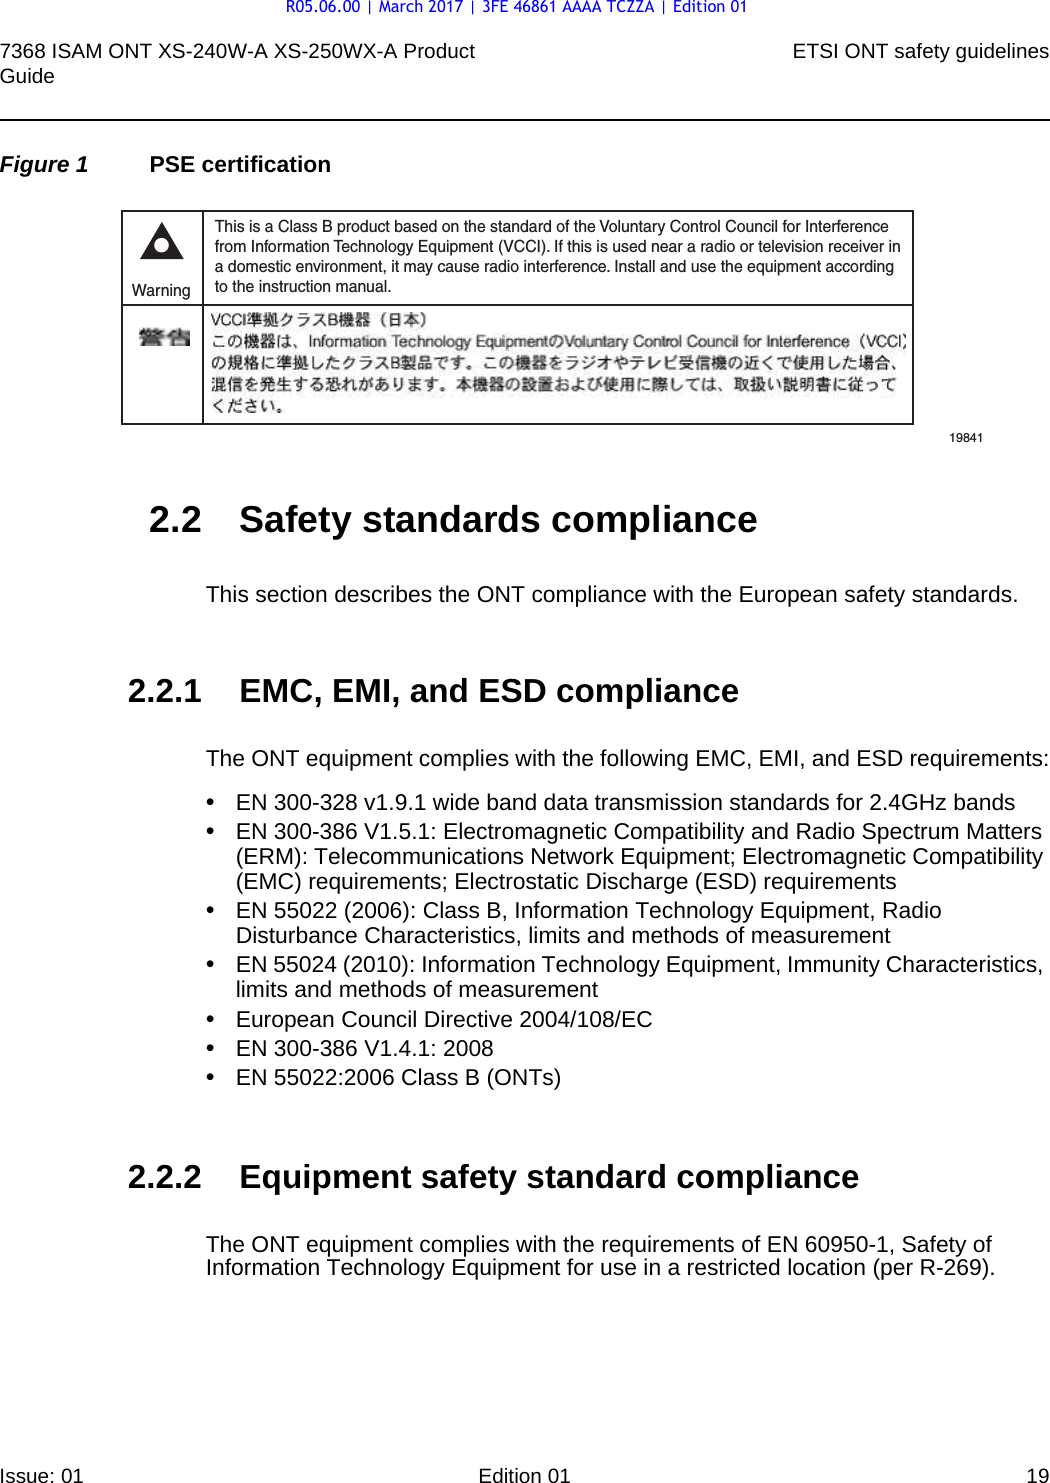 7368 ISAM ONT XS-240W-A XS-250WX-A Product Guide ETSI ONT safety guidelinesIssue: 01 Edition 01 19 Figure 1 PSE certification2.2 Safety standards complianceThis section describes the ONT compliance with the European safety standards.2.2.1 EMC, EMI, and ESD complianceThe ONT equipment complies with the following EMC, EMI, and ESD requirements:•EN 300-328 v1.9.1 wide band data transmission standards for 2.4GHz bands•EN 300-386 V1.5.1: Electromagnetic Compatibility and Radio Spectrum Matters (ERM): Telecommunications Network Equipment; Electromagnetic Compatibility (EMC) requirements; Electrostatic Discharge (ESD) requirements•EN 55022 (2006): Class B, Information Technology Equipment, Radio Disturbance Characteristics, limits and methods of measurement•EN 55024 (2010): Information Technology Equipment, Immunity Characteristics, limits and methods of measurement•European Council Directive 2004/108/EC•EN 300-386 V1.4.1: 2008•EN 55022:2006 Class B (ONTs)2.2.2 Equipment safety standard complianceThe ONT equipment complies with the requirements of EN 60950-1, Safety of Information Technology Equipment for use in a restricted location (per R-269).This is a Class B product based on the standard of the Voluntary Control Council for Interferencefrom Information Technology Equipment (VCCI). If this is used near a radio or television receiver ina domestic environment, it may cause radio interference. Install and use the equipment accordingto the instruction manual. Warning19841R05.06.00 | March 2017 | 3FE 46861 AAAA TCZZA | Edition 01